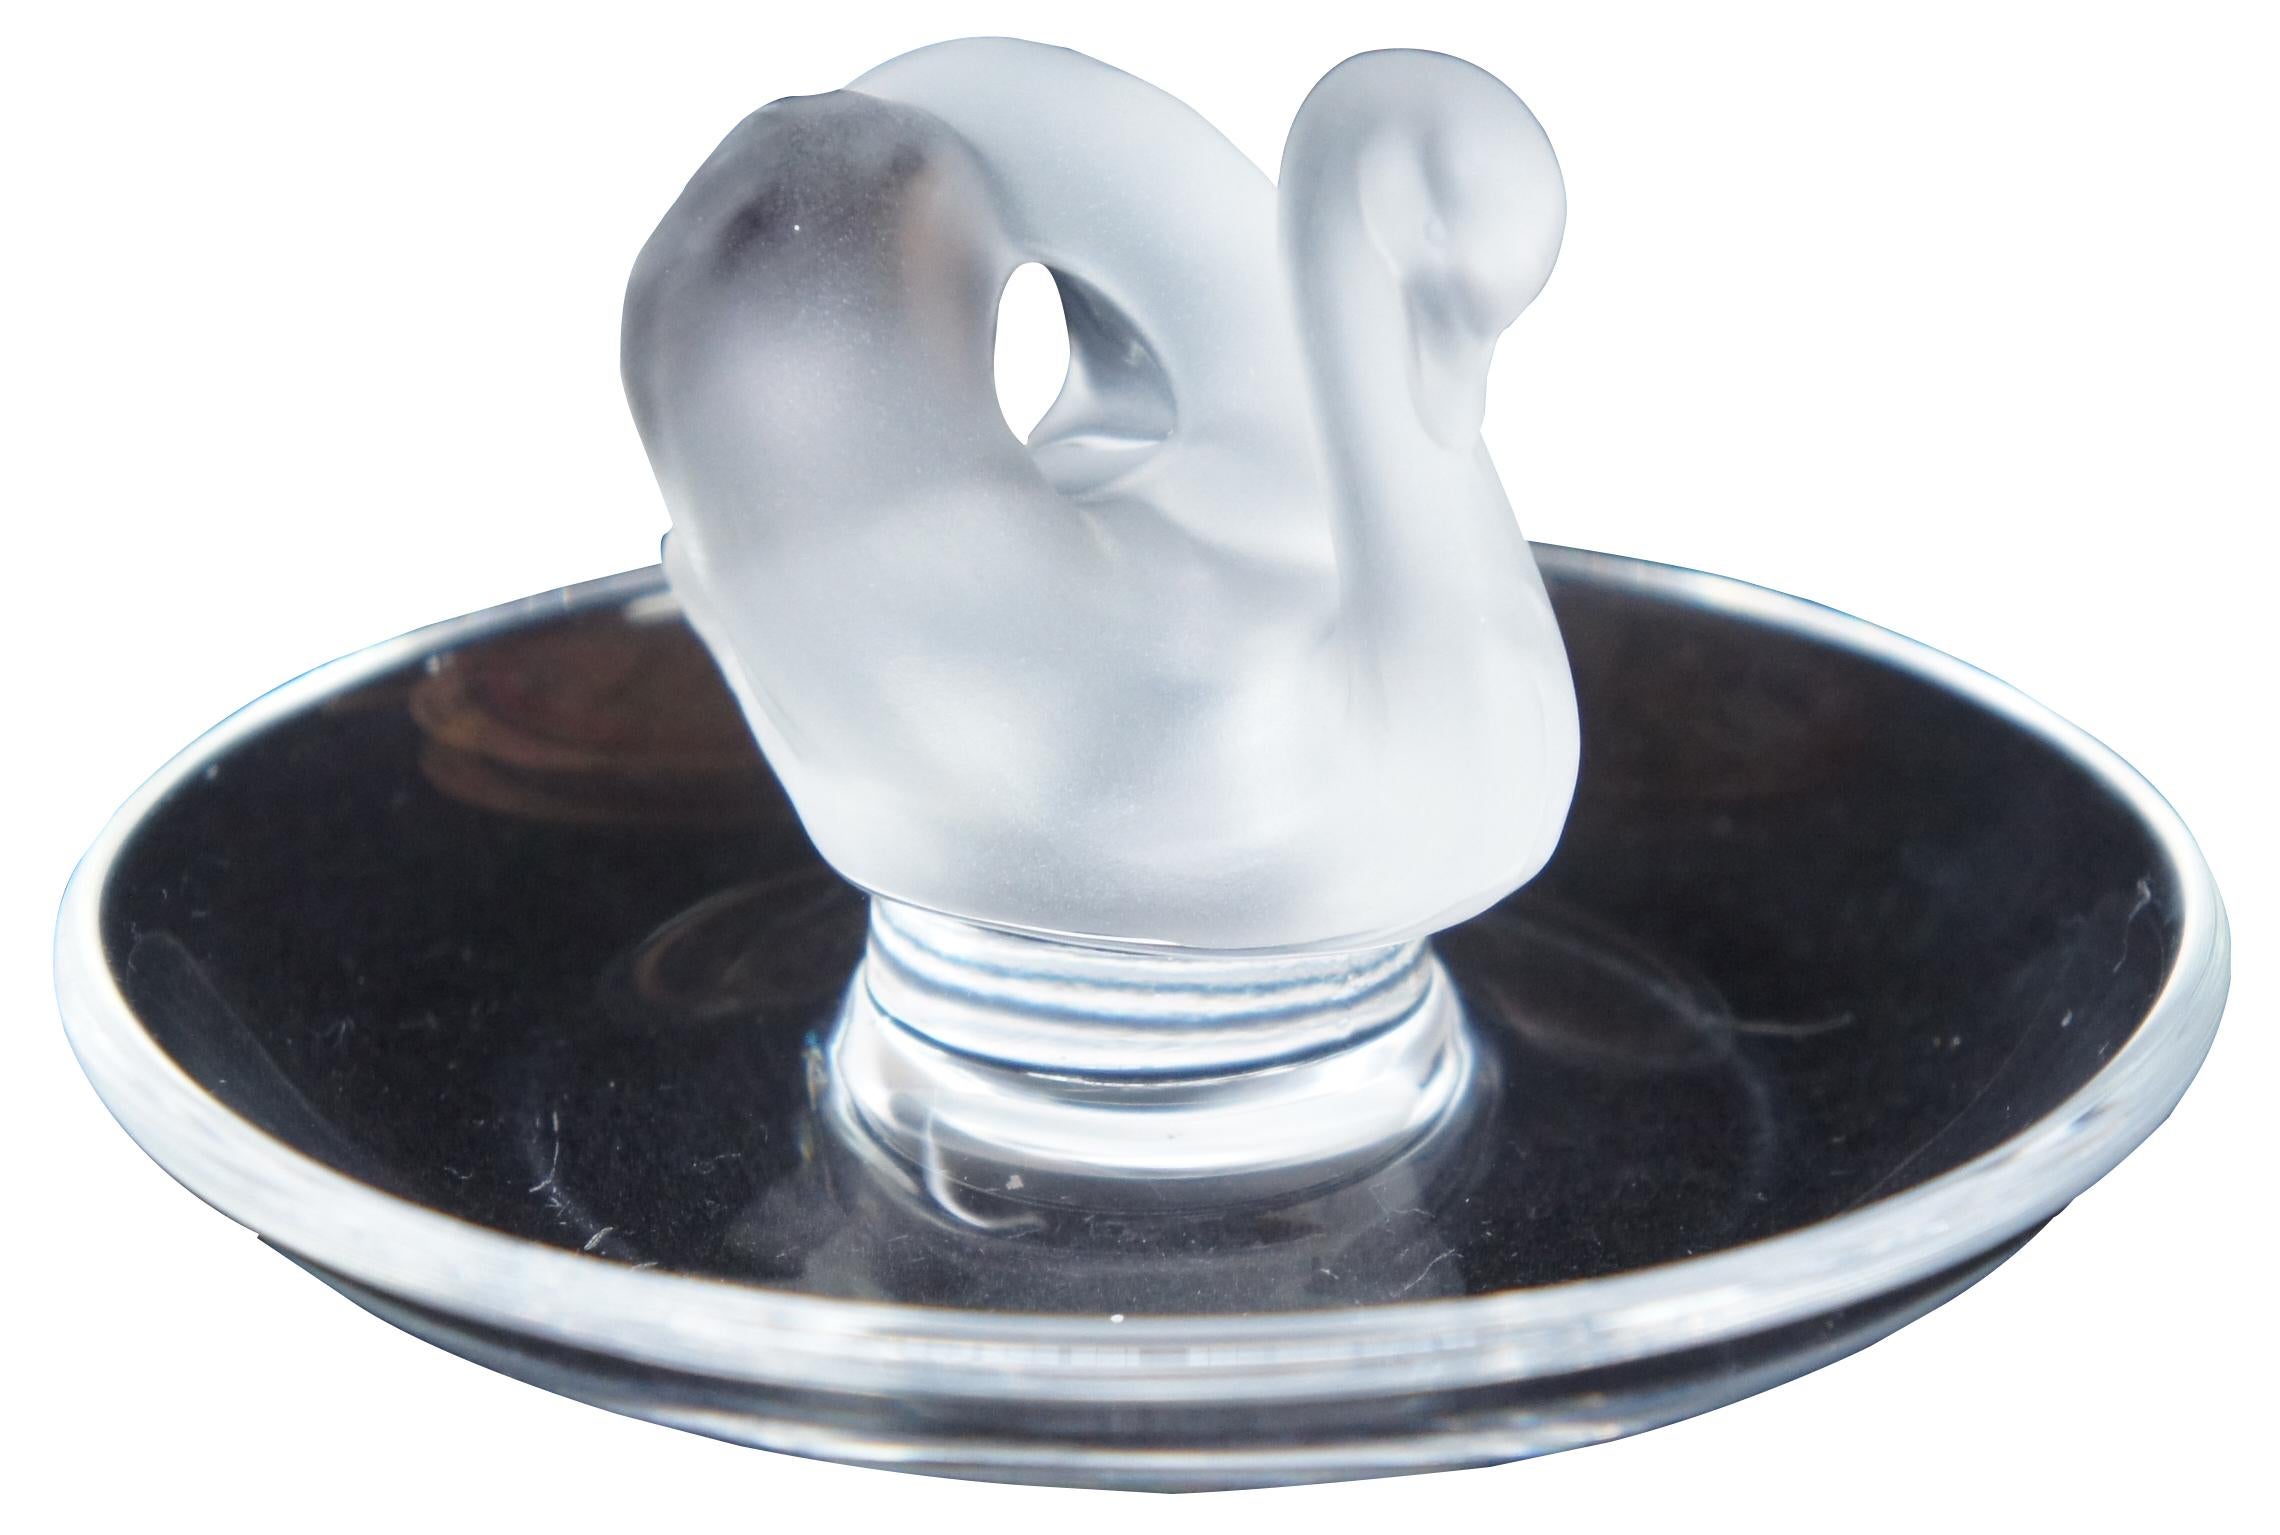 Vintage Lalique French crystal ring holder dish with frosted glass swan centerpiece. Measure: 4